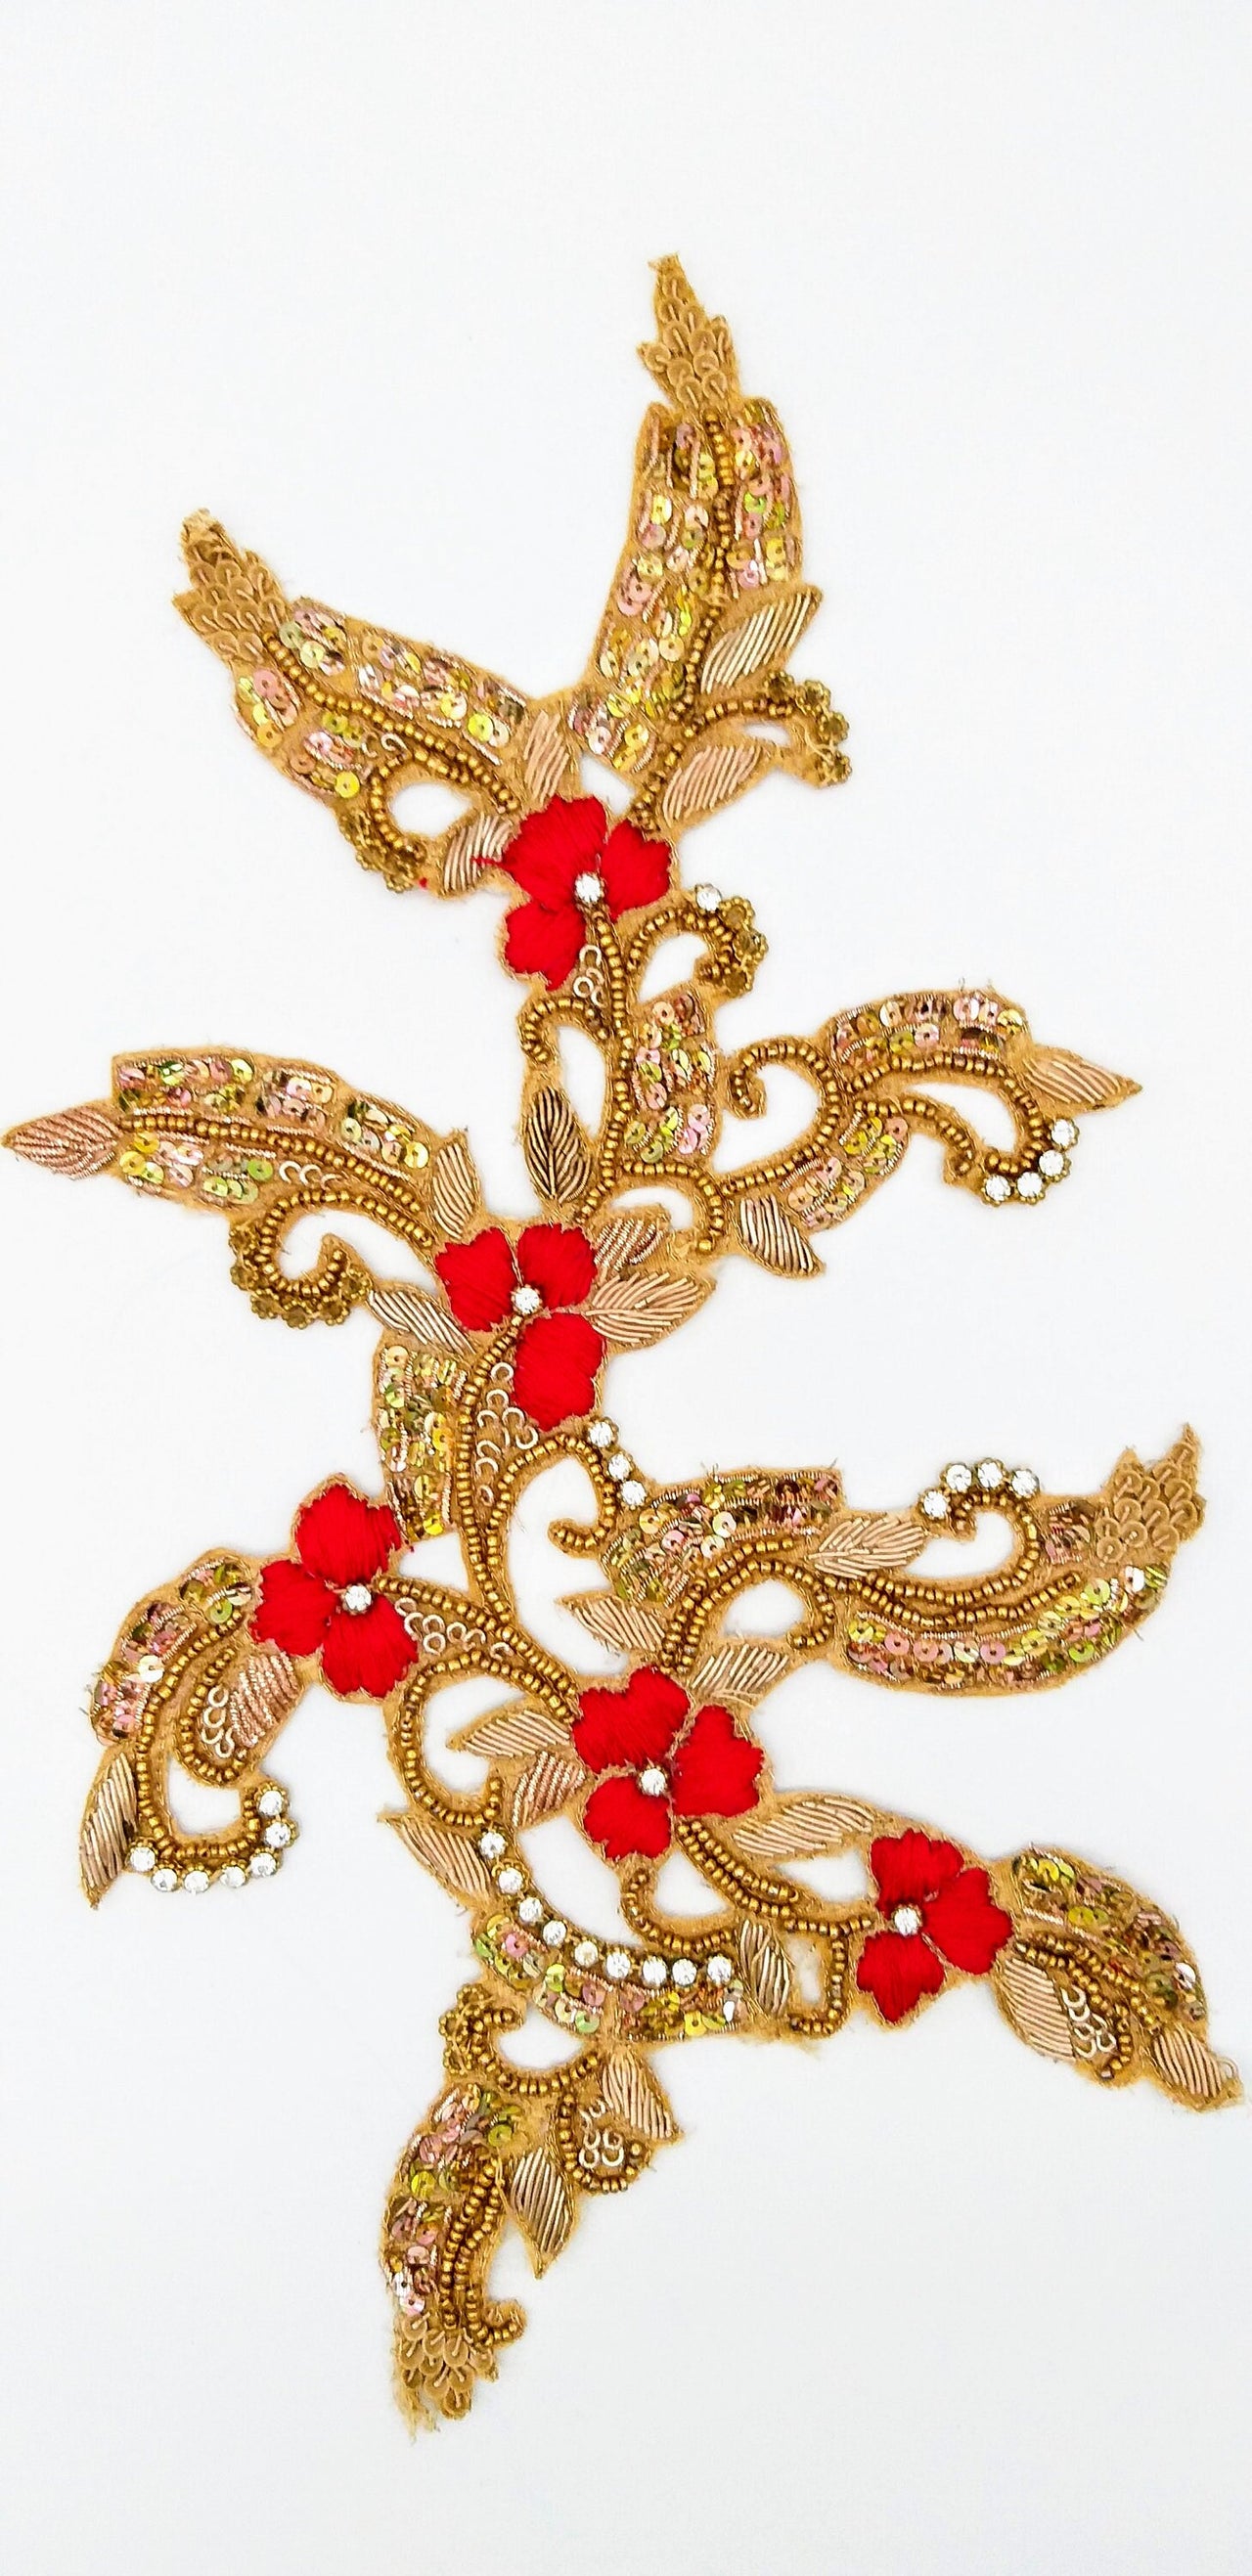 Hand Embroidered Zardozi Floral Applique in Red and Antique Gold, Wedding Dress Applique,Sari Blouse Applique